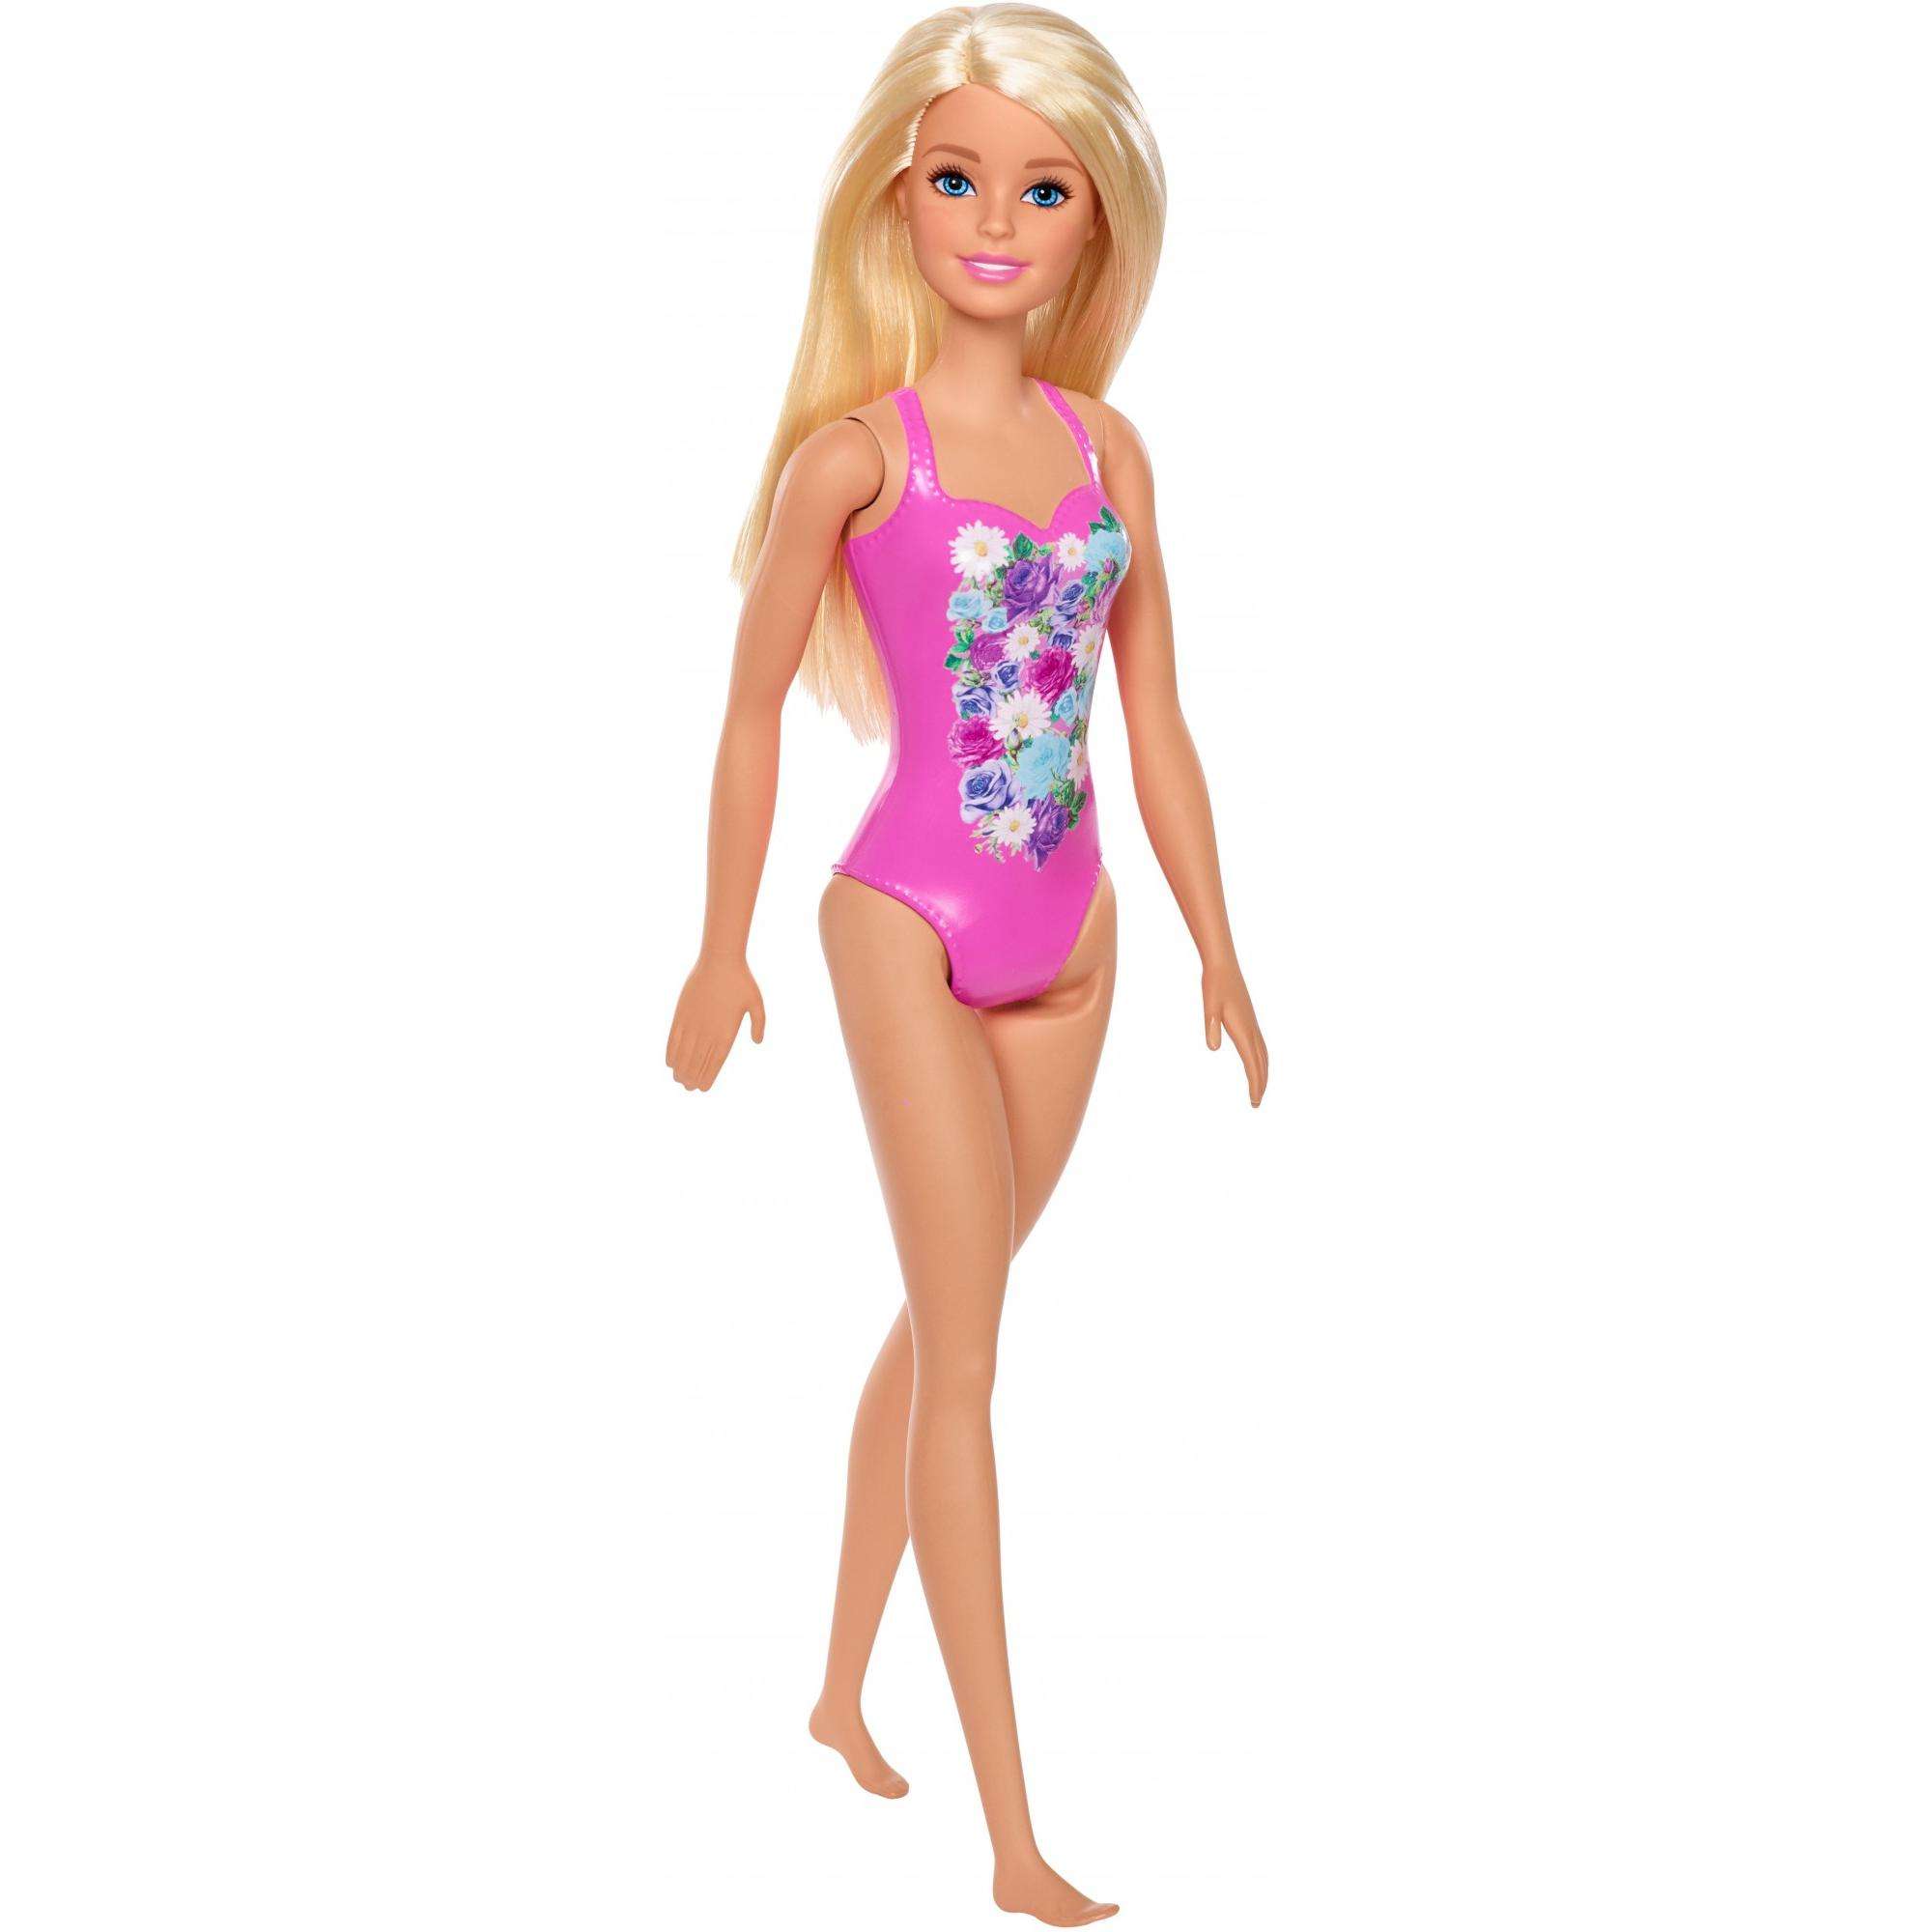 Barbie Beach Doll with Pink Graphic One-Piece Swimsuit - image 2 of 5